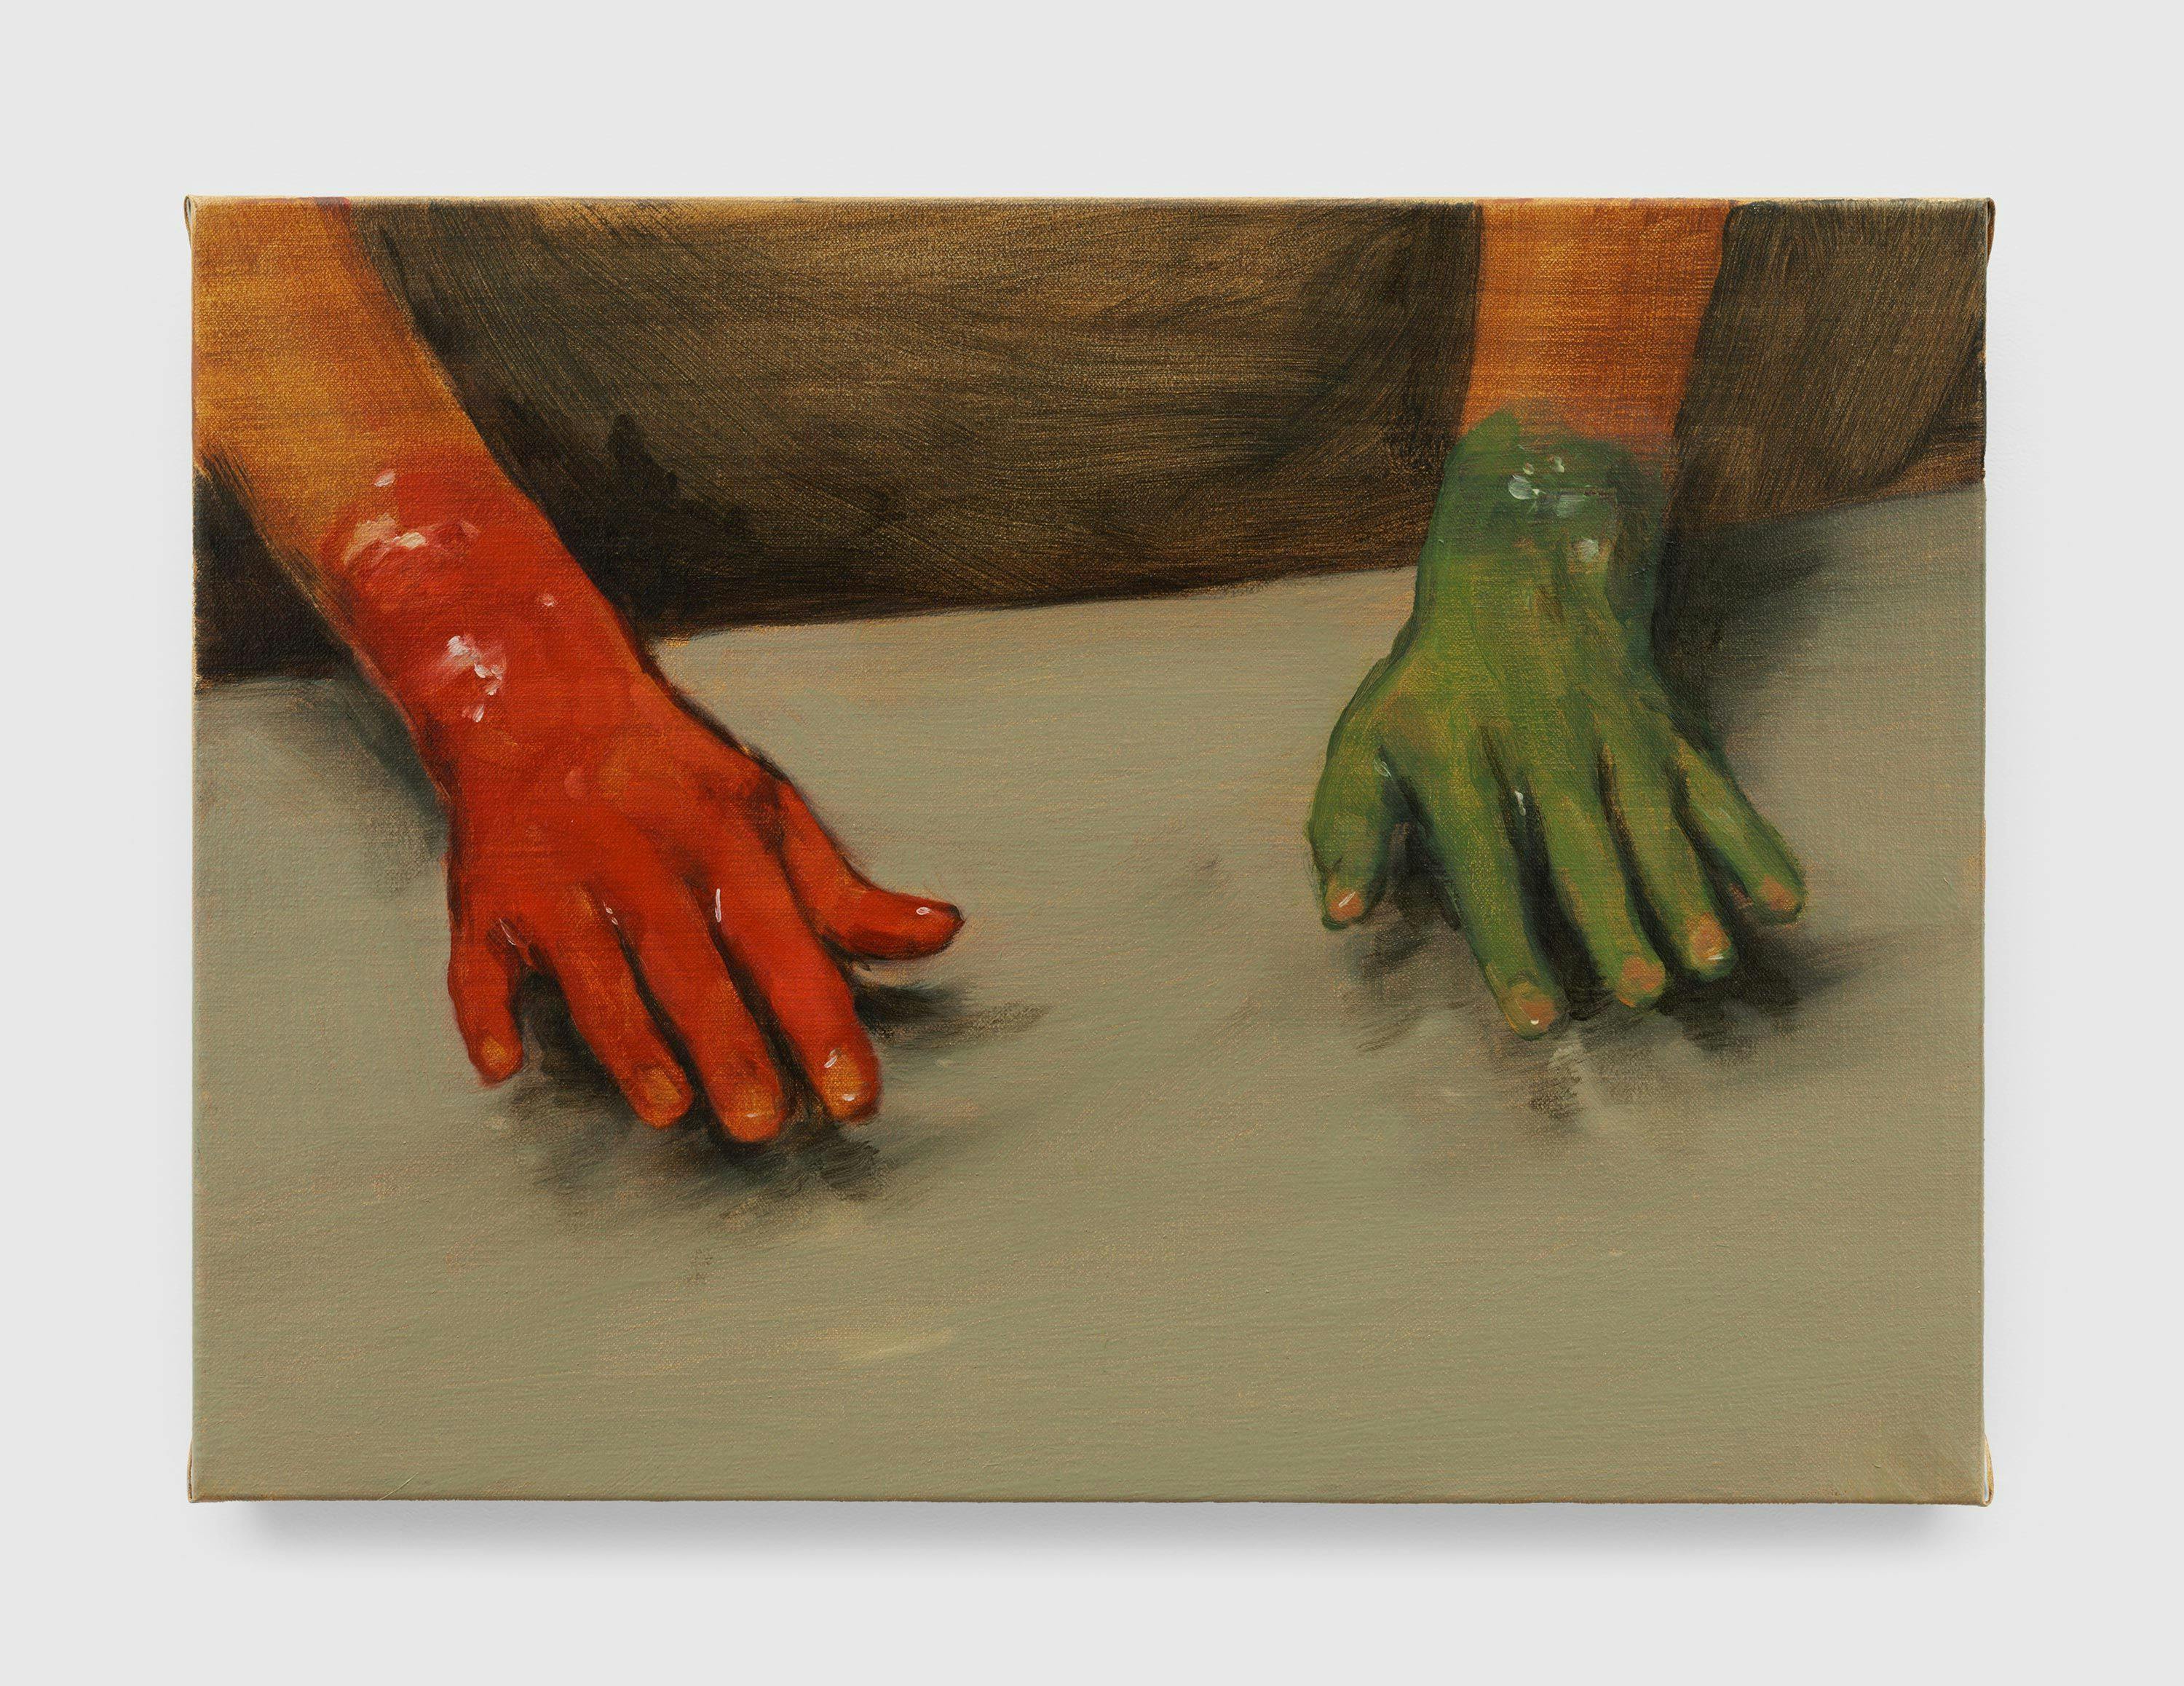 A painting by Michaël Borremans, titled Red Hand, Green Hand (2), dated 2010.